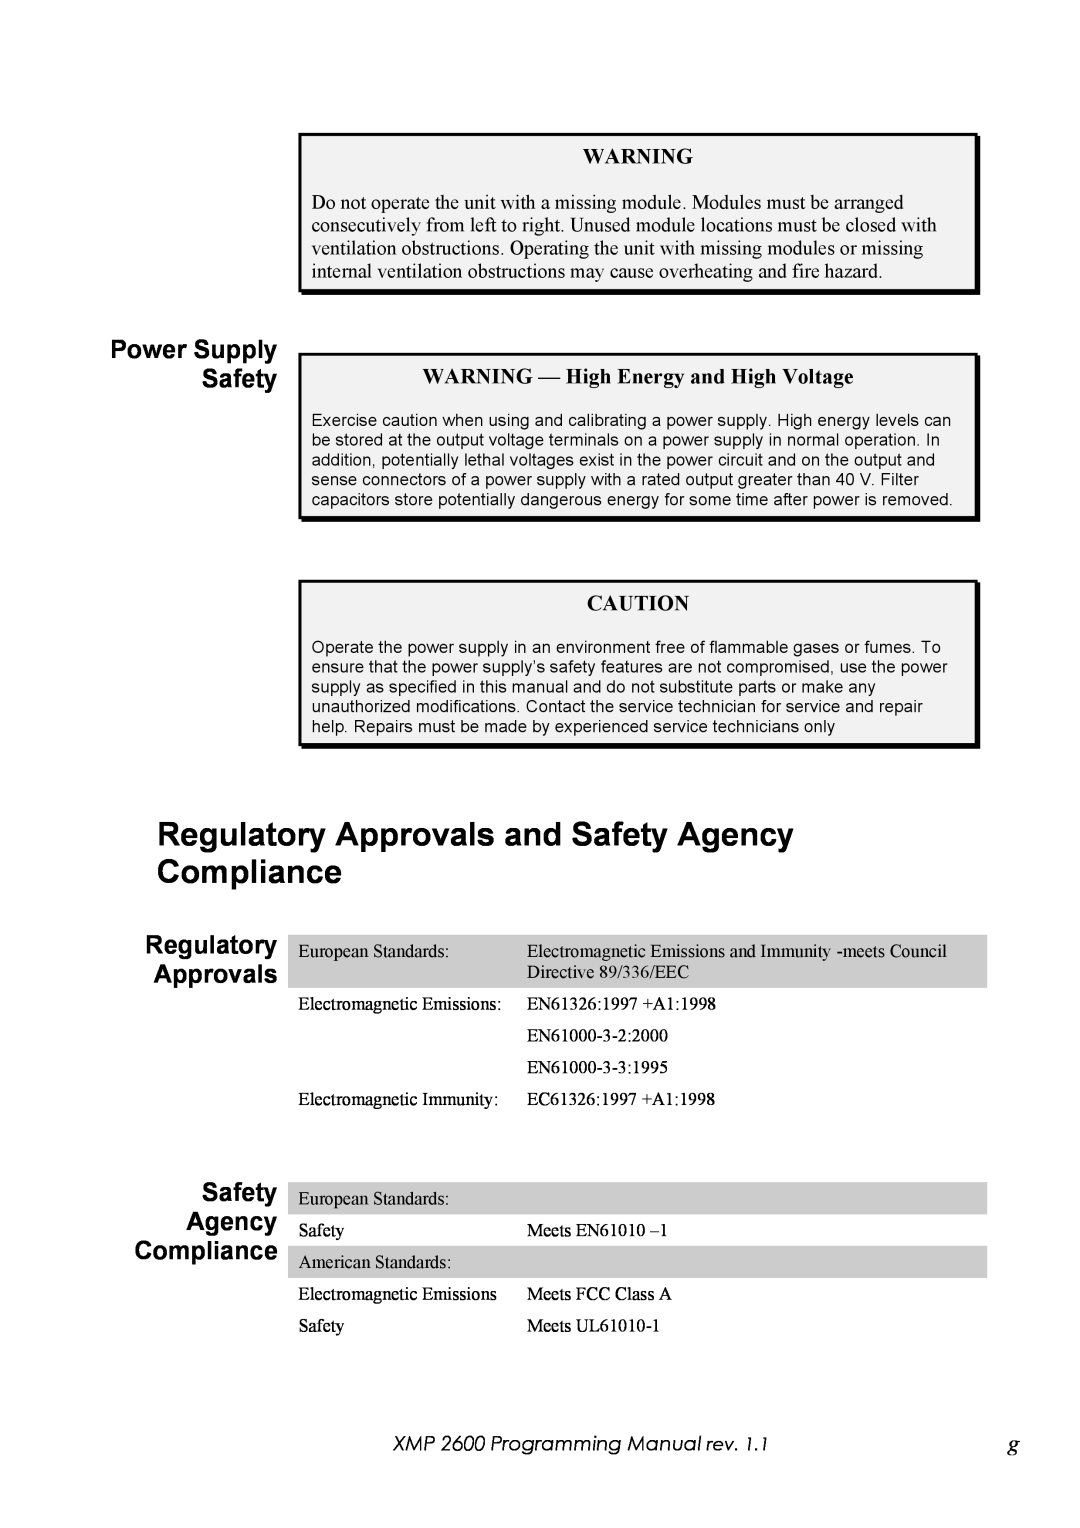 Xantrex Technology XMP 2600 manual Regulatory Approvals and Safety Agency Compliance, Power Supply Safety 